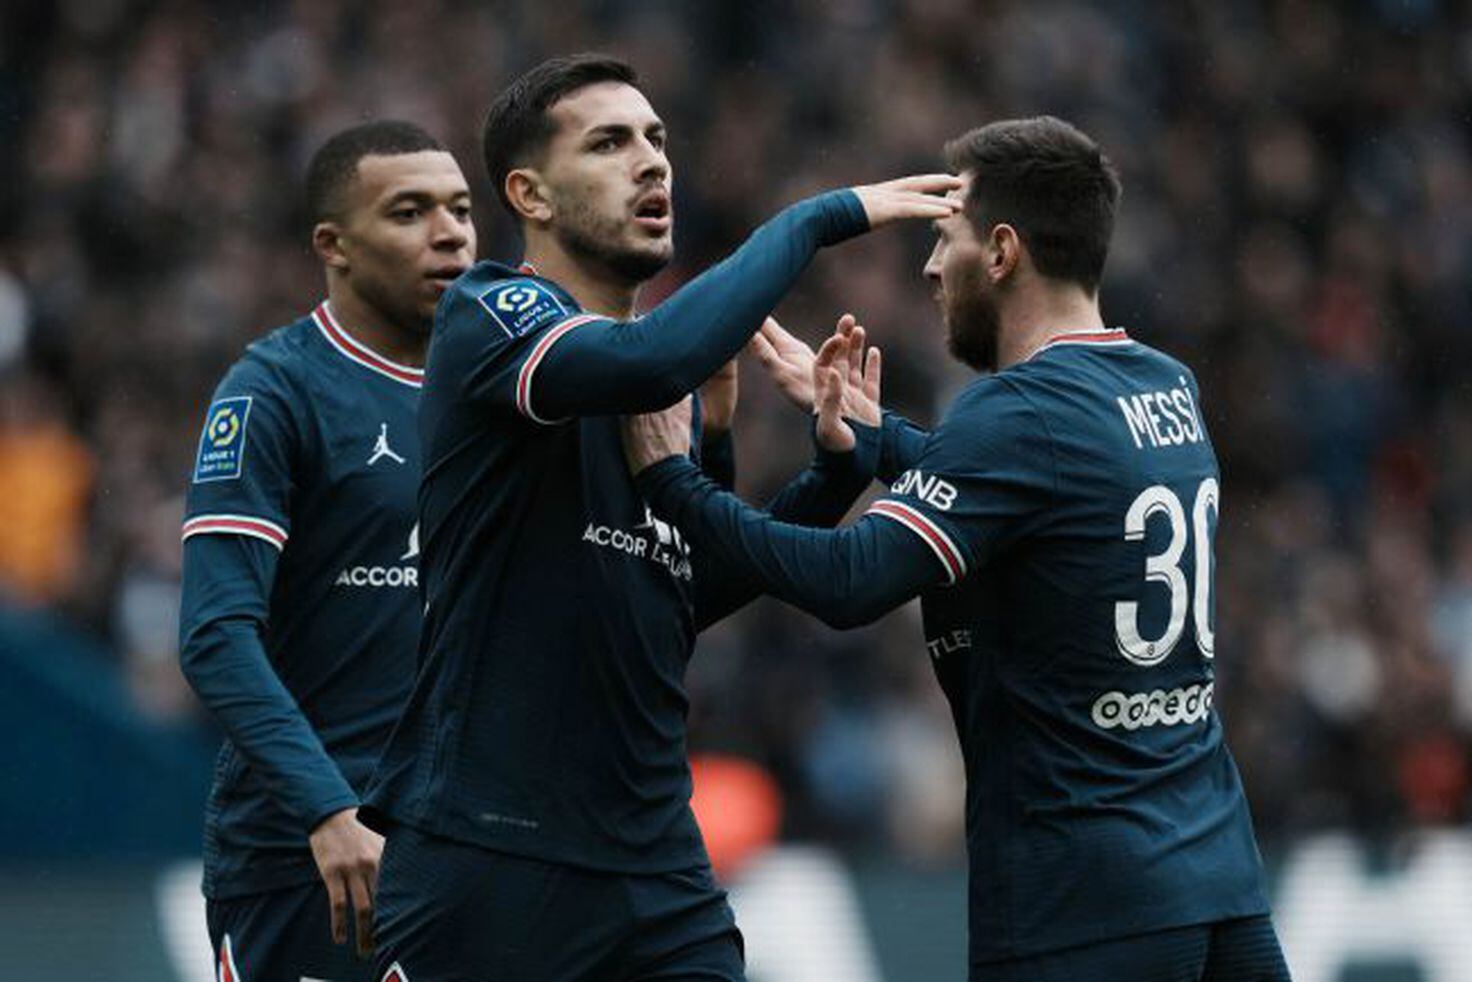 PSG's Leandro Paredes celebrates with his teammate Lionel Messi, right, and Kylian Mbappé, left, after scoring PSG's third goal against Bordeaux at the Parc des Princes stadium in Paris, France on Sunday 13 March 2022.